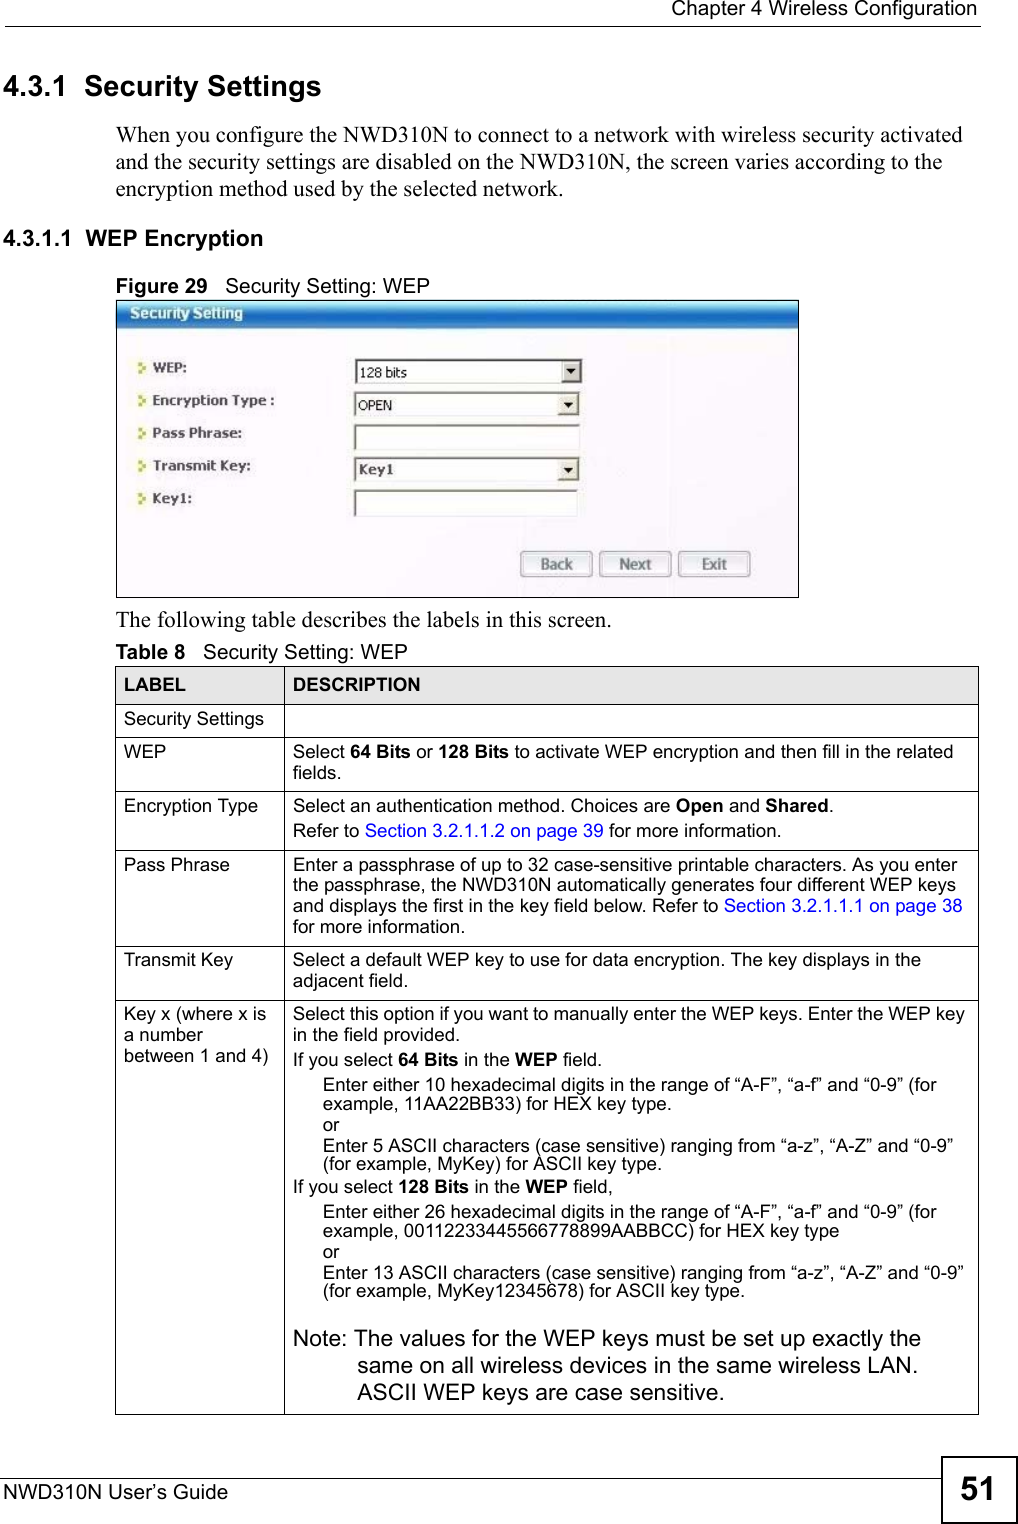  Chapter 4 Wireless ConfigurationNWD310N User’s Guide 514.3.1  Security Settings When you configure the NWD310N to connect to a network with wireless security activated and the security settings are disabled on the NWD310N, the screen varies according to the encryption method used by the selected network.4.3.1.1  WEP EncryptionFigure 29   Security Setting: WEP  The following table describes the labels in this screen.  Table 8   Security Setting: WEP LABEL DESCRIPTIONSecurity SettingsWEP Select 64 Bits or 128 Bits to activate WEP encryption and then fill in the related fields.Encryption Type Select an authentication method. Choices are Open and Shared.Refer to Section 3.2.1.1.2 on page 39 for more information.Pass Phrase Enter a passphrase of up to 32 case-sensitive printable characters. As you enter the passphrase, the NWD310N automatically generates four different WEP keys and displays the first in the key field below. Refer to Section 3.2.1.1.1 on page 38 for more information.Transmit Key Select a default WEP key to use for data encryption. The key displays in the adjacent field.Key x (where x is a number between 1 and 4)Select this option if you want to manually enter the WEP keys. Enter the WEP key in the field provided.If you select 64 Bits in the WEP field.Enter either 10 hexadecimal digits in the range of “A-F”, “a-f” and “0-9” (for example, 11AA22BB33) for HEX key type.orEnter 5 ASCII characters (case sensitive) ranging from “a-z”, “A-Z” and “0-9” (for example, MyKey) for ASCII key type. If you select 128 Bits in the WEP field,Enter either 26 hexadecimal digits in the range of “A-F”, “a-f” and “0-9” (for example, 00112233445566778899AABBCC) for HEX key typeorEnter 13 ASCII characters (case sensitive) ranging from “a-z”, “A-Z” and “0-9” (for example, MyKey12345678) for ASCII key type.Note: The values for the WEP keys must be set up exactly the same on all wireless devices in the same wireless LAN. ASCII WEP keys are case sensitive.